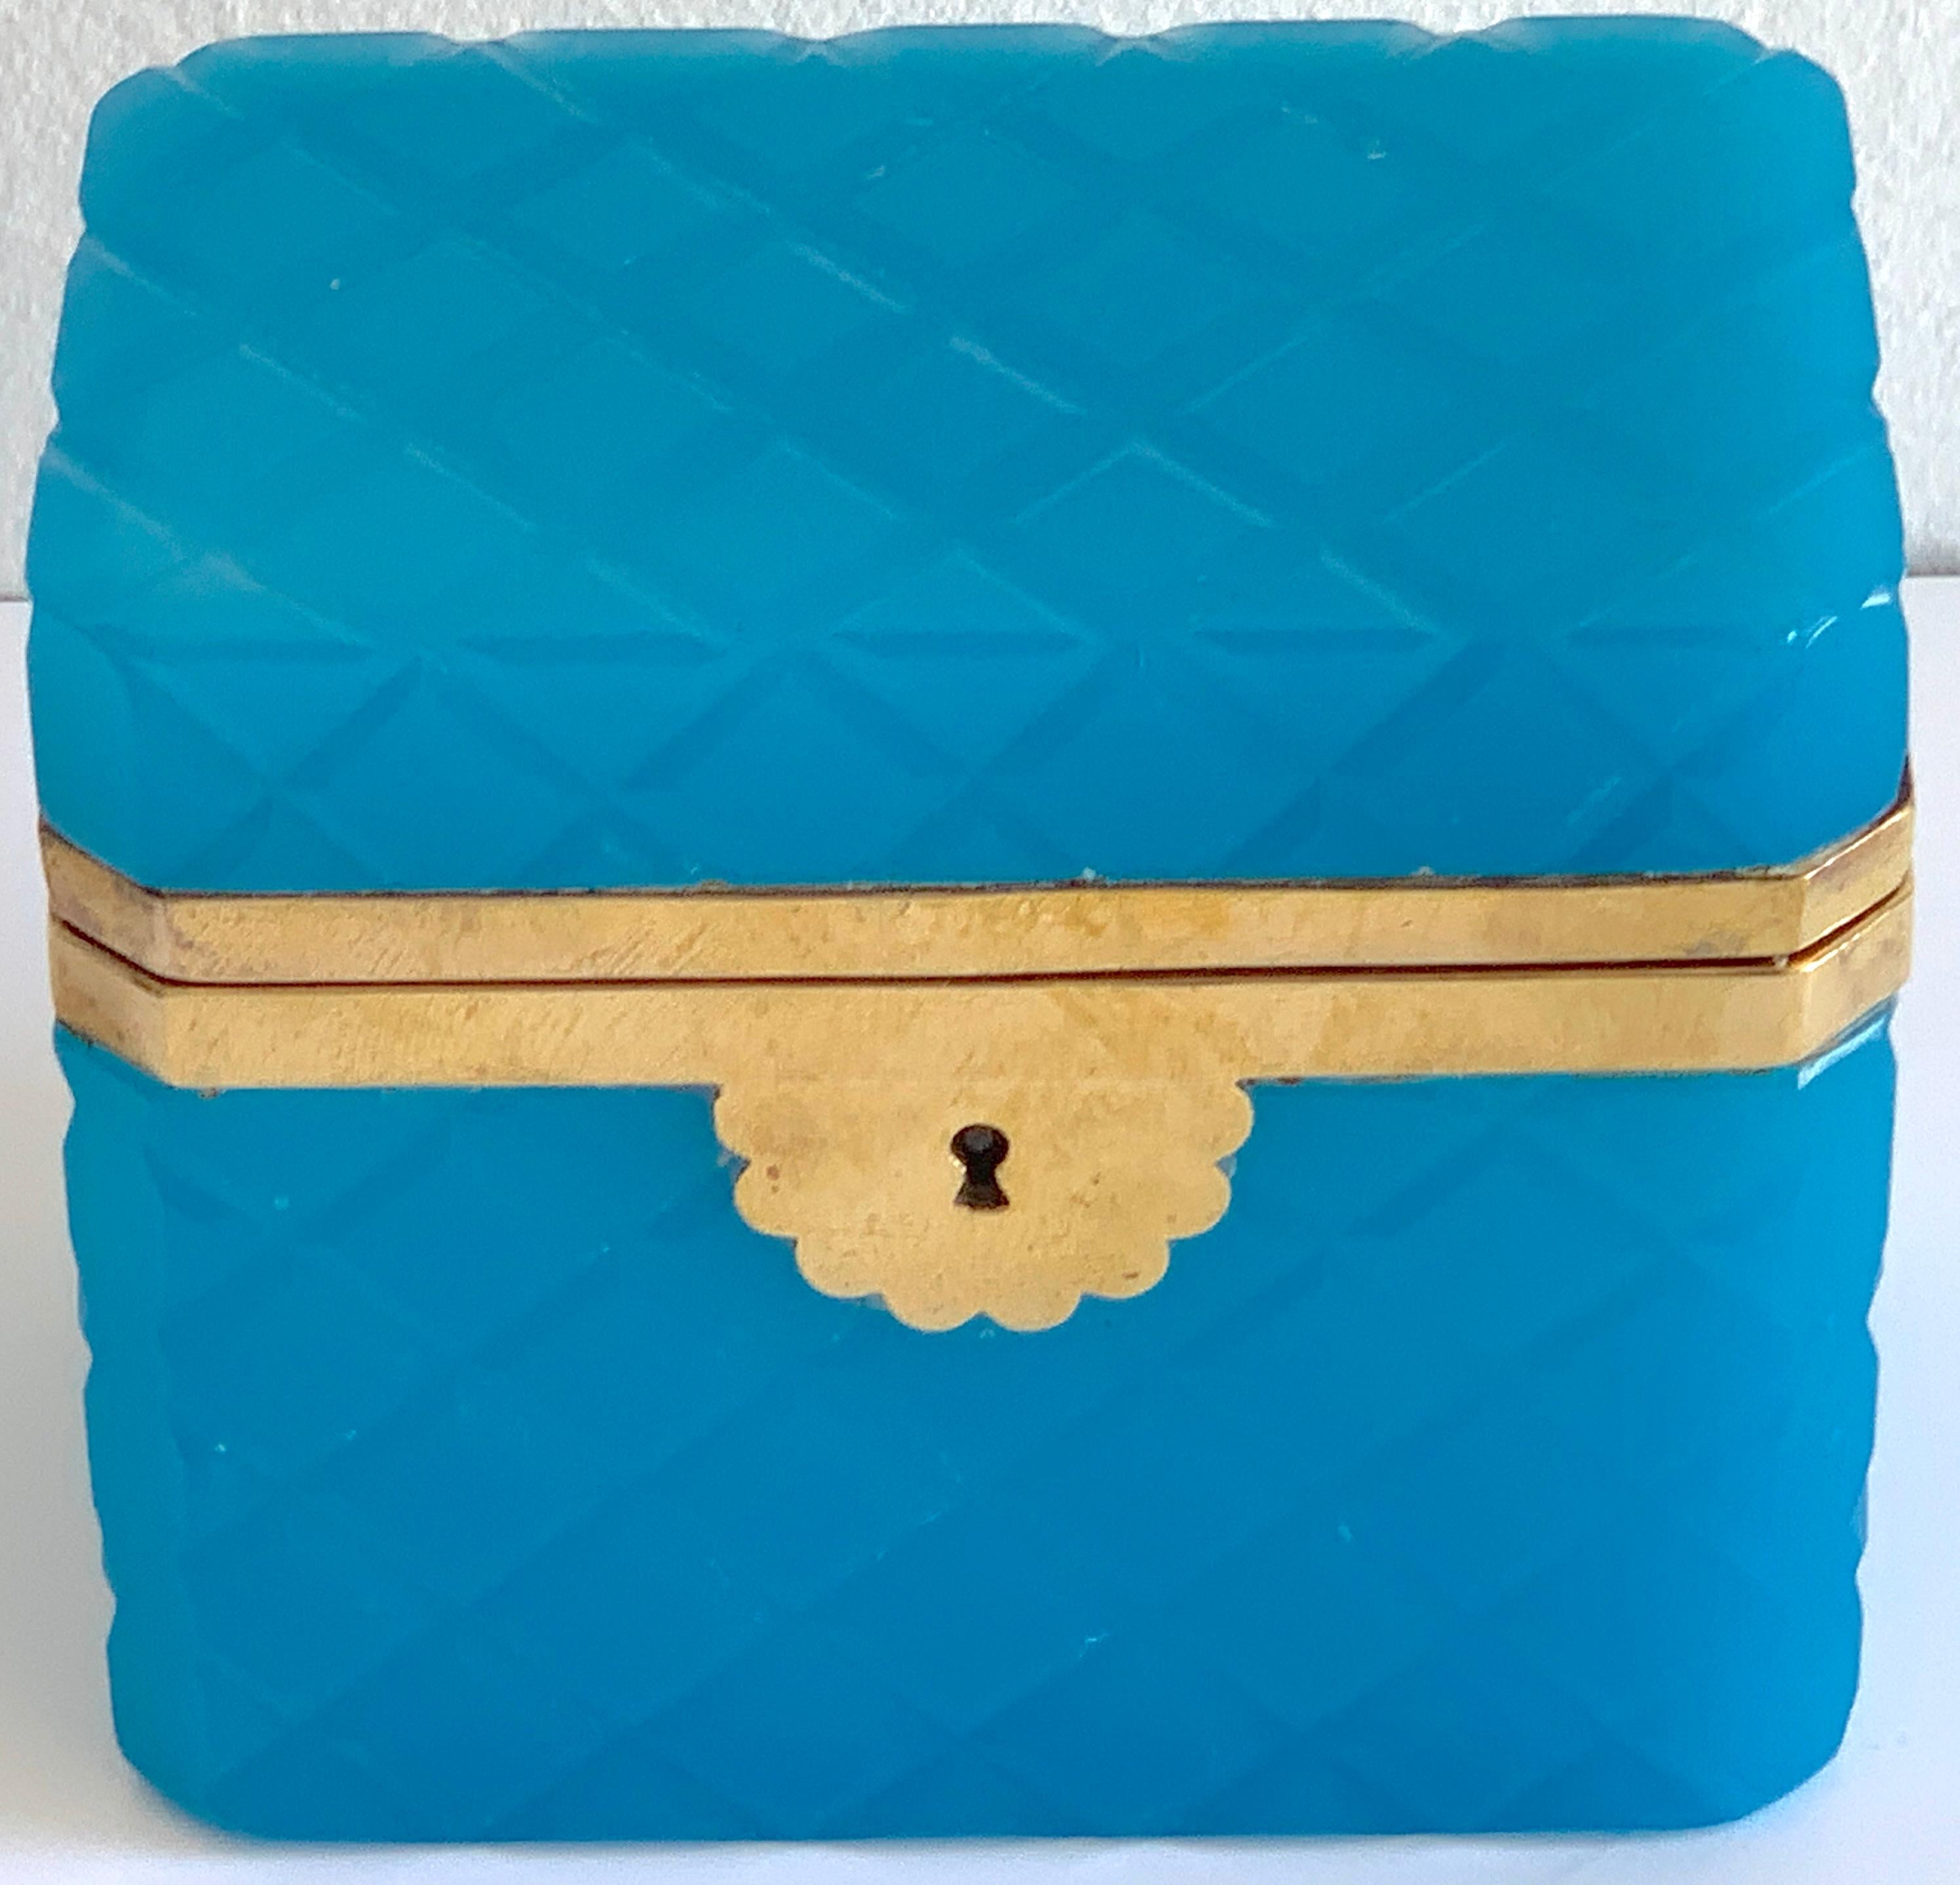 Exquisite Cut Blue Opaline Box, with Key 1